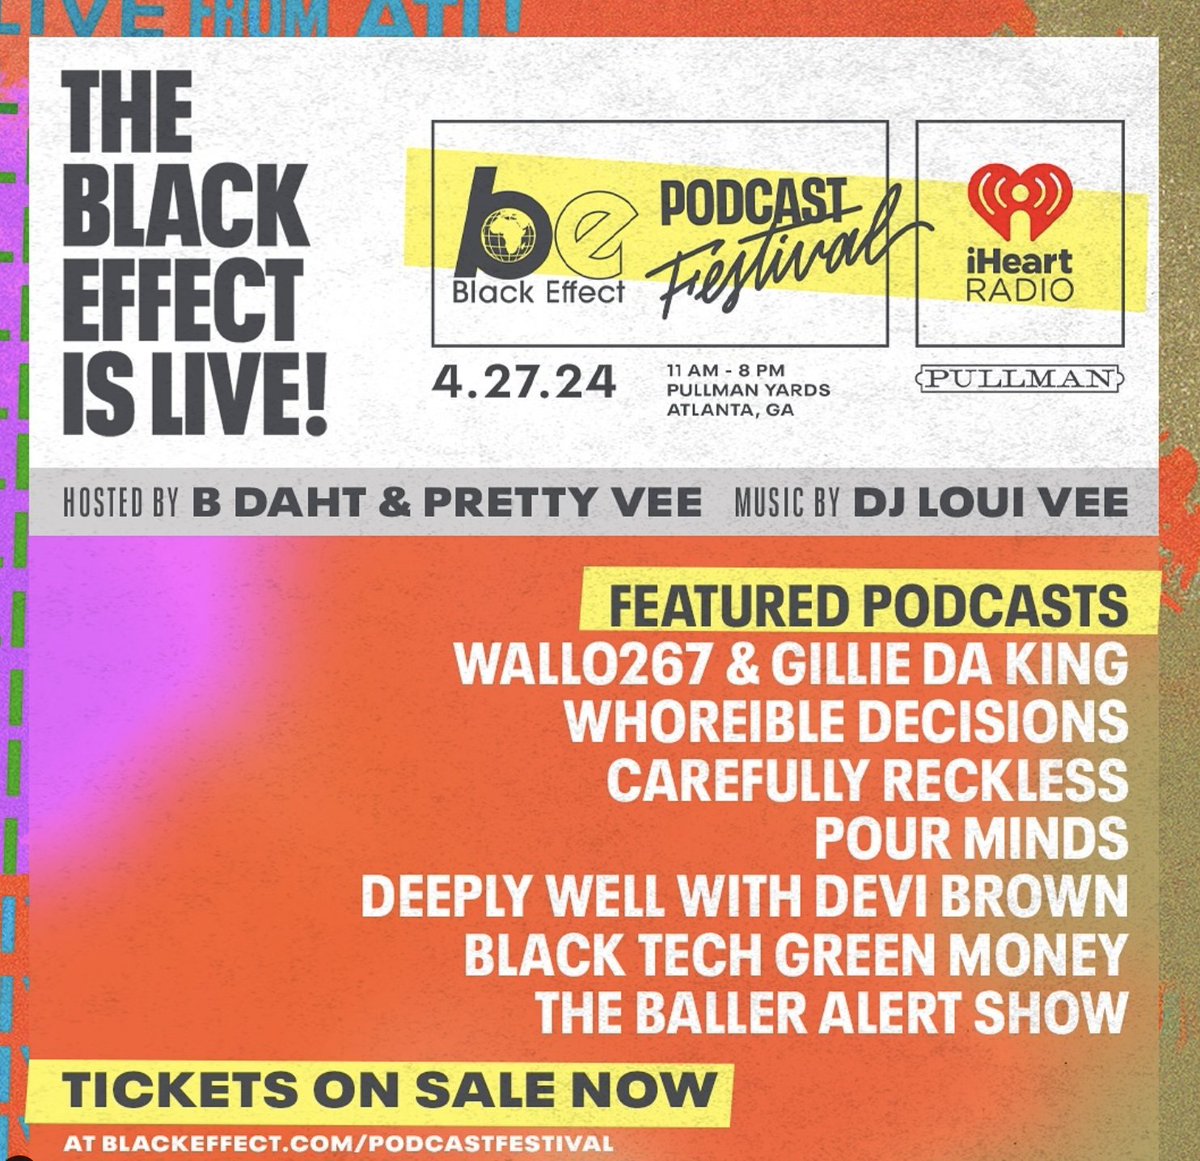 It's about that time 🗣 The second annual Black Effect Podcast Festival is 5 days away from happening in Atlanta! Your fave podcasts will be live and ready for whatevaaaa 🥳😝 You don't wanna miss it! 🔥 Still need a ticket?! 👀 We got you! ihe.art/ctLtMKs